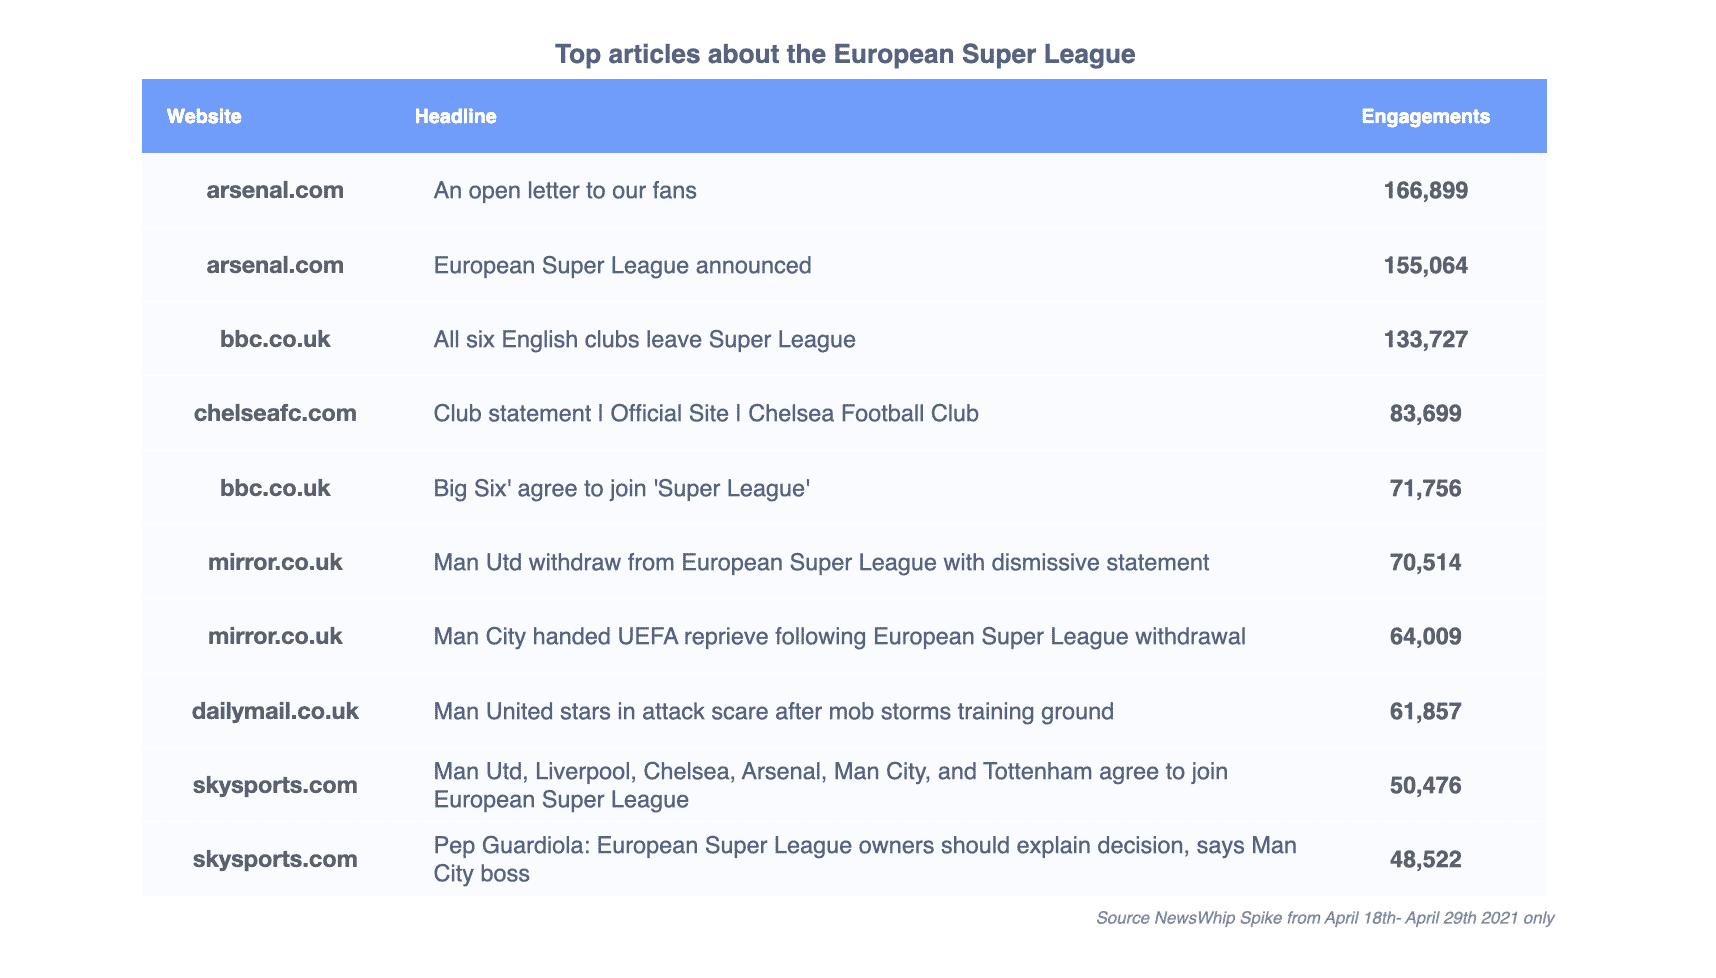 Chart showing the most engaged articles about the European Super League